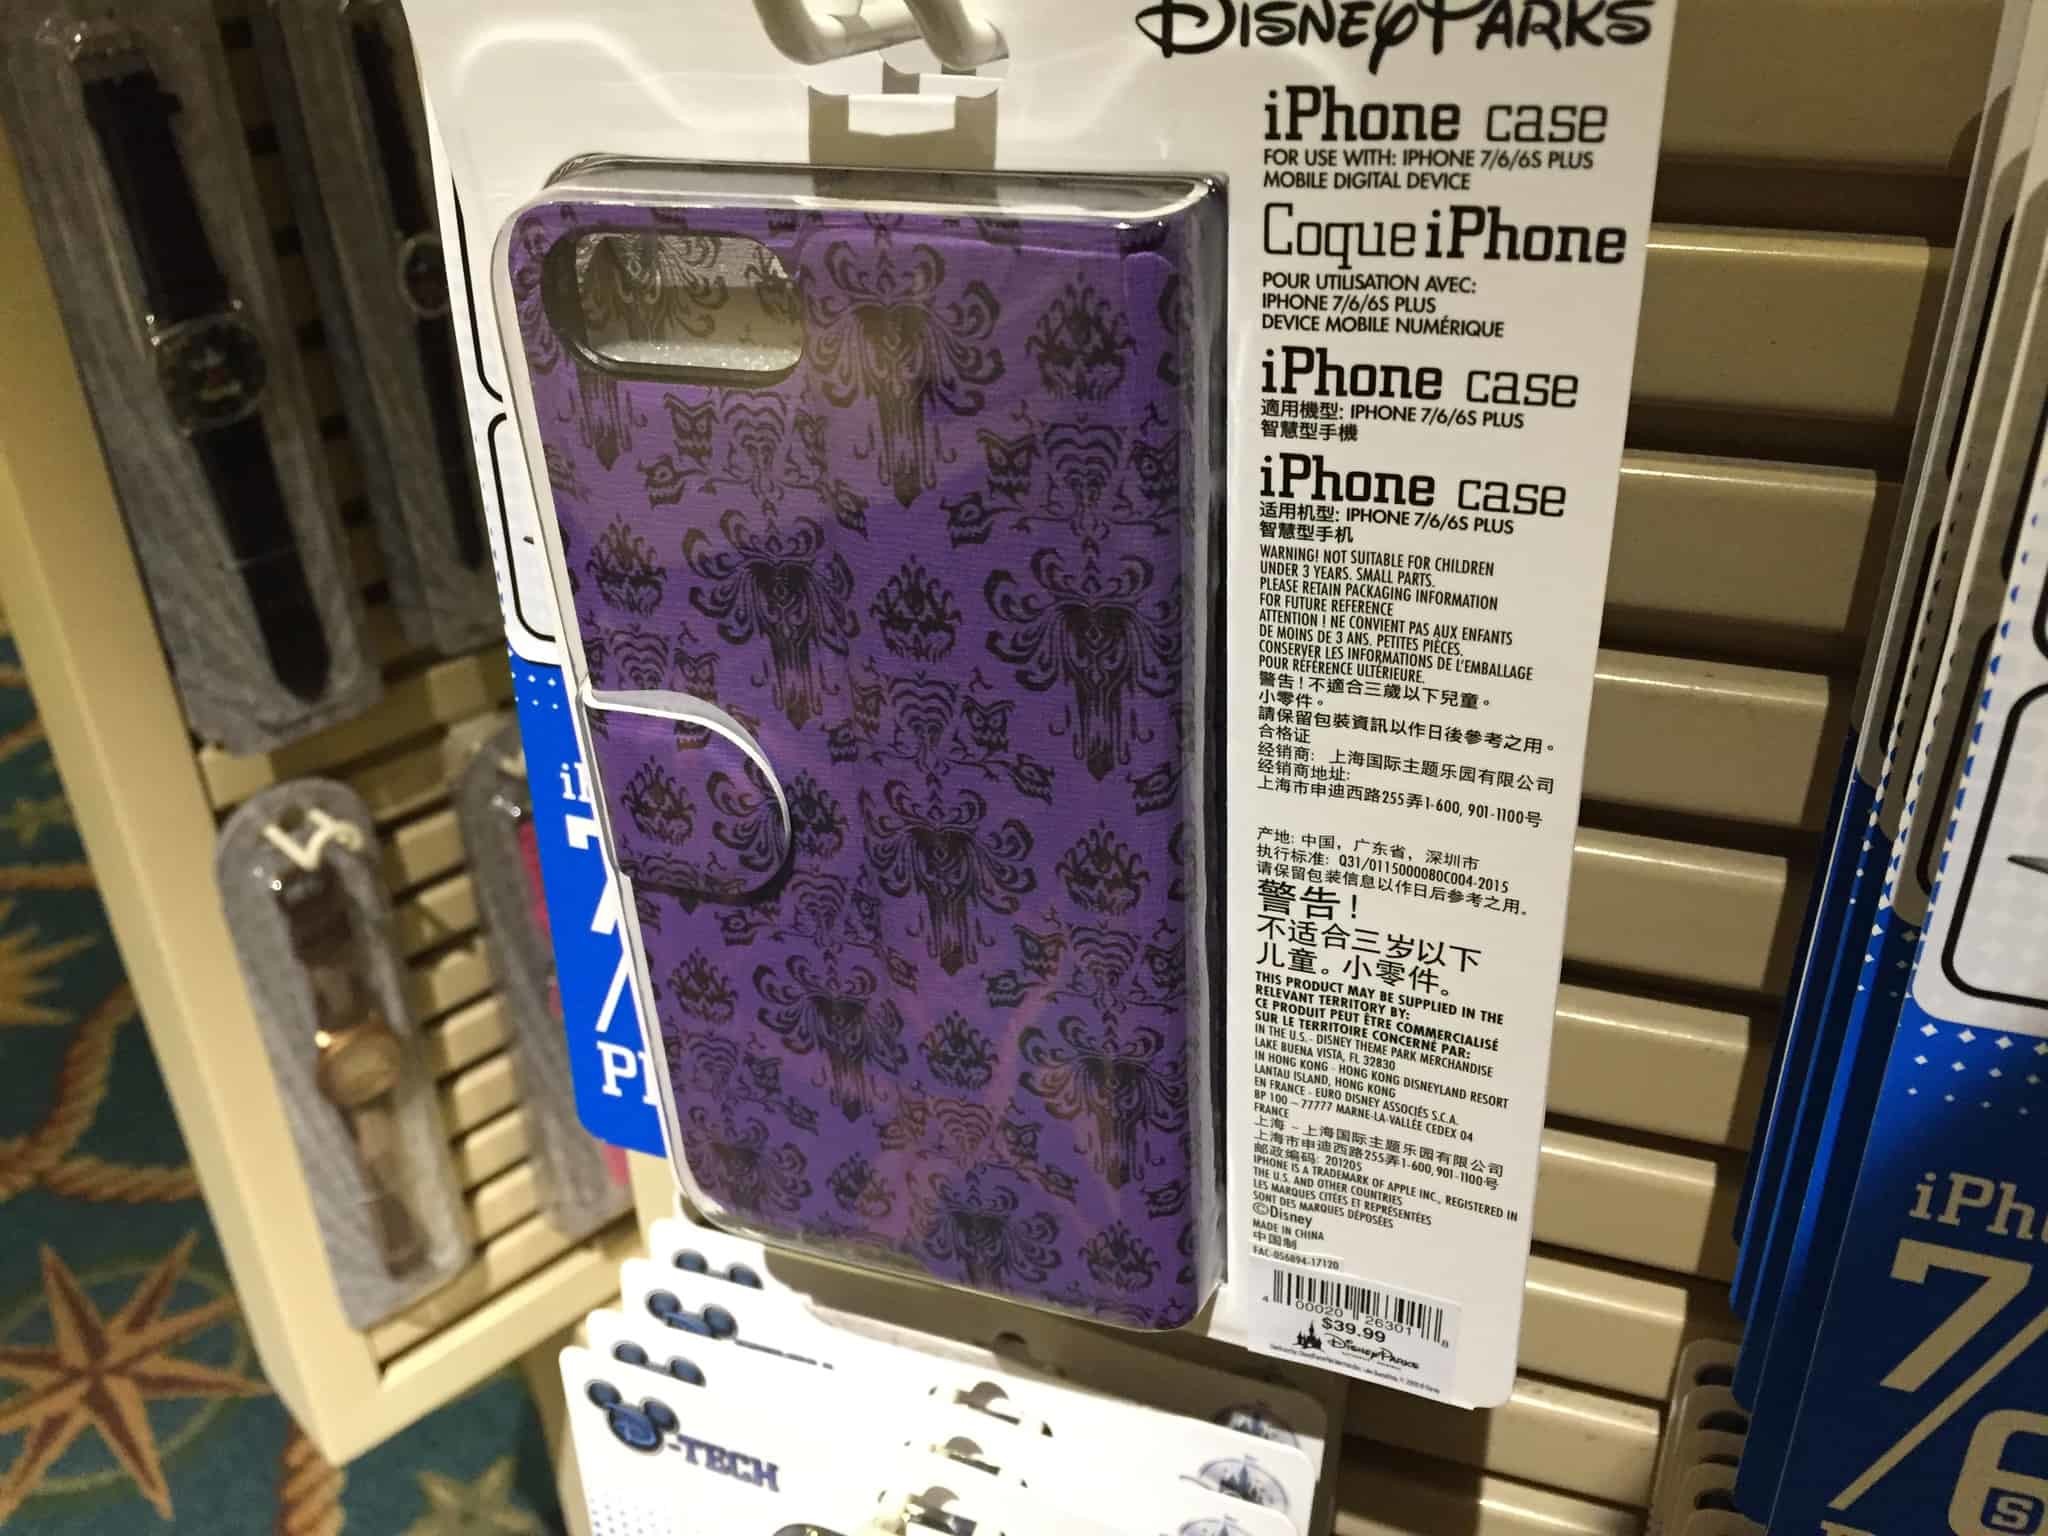 2048x1536 New at Disney Parks is a Haunted Mansion wallpaper reversible portfolio  phone case for the iPhone 7/6/6S Plus devices.